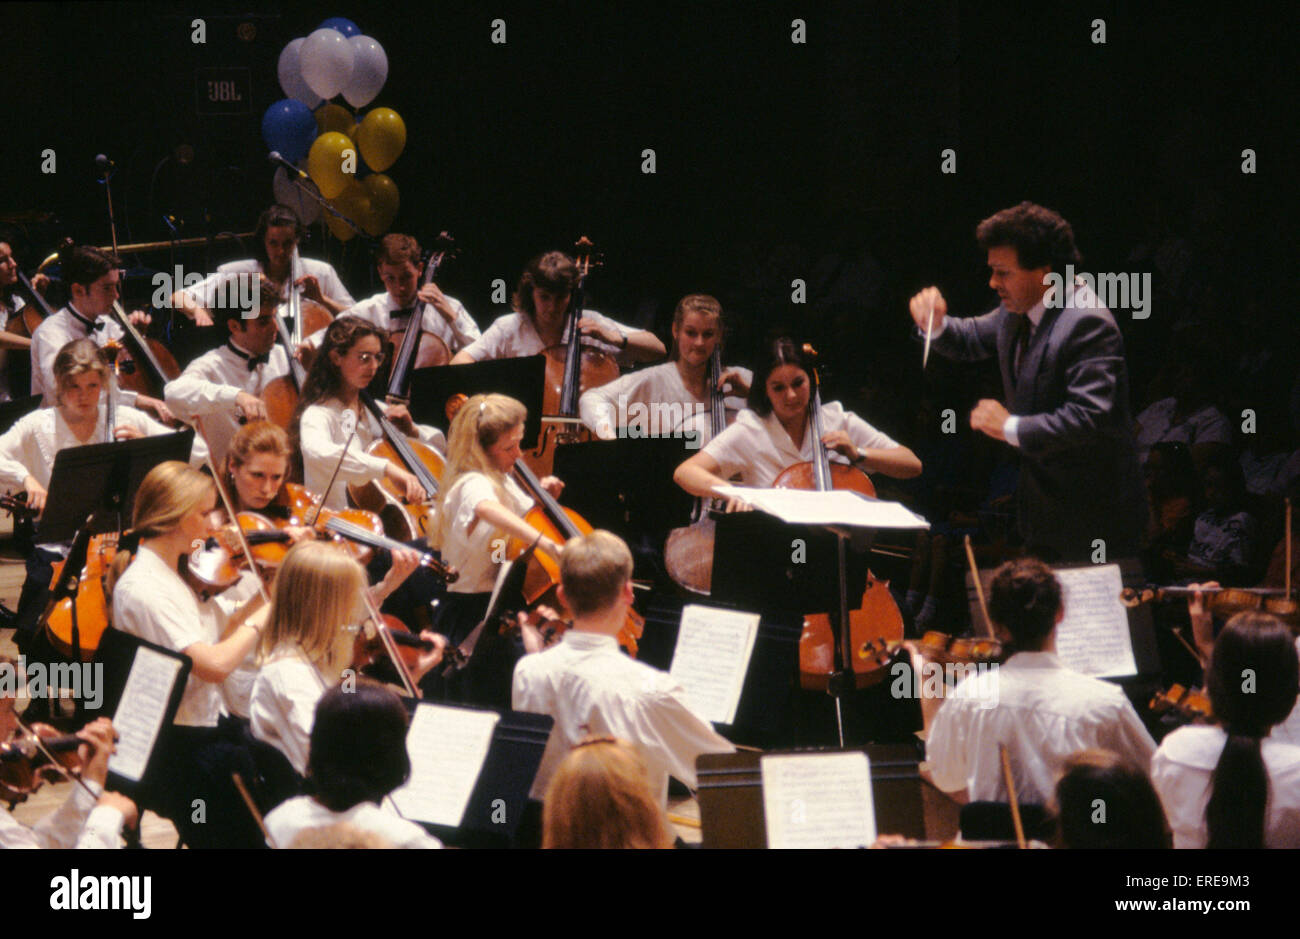 Youth Orchestra playing in concert 'cello section with conductor. Stock Photo